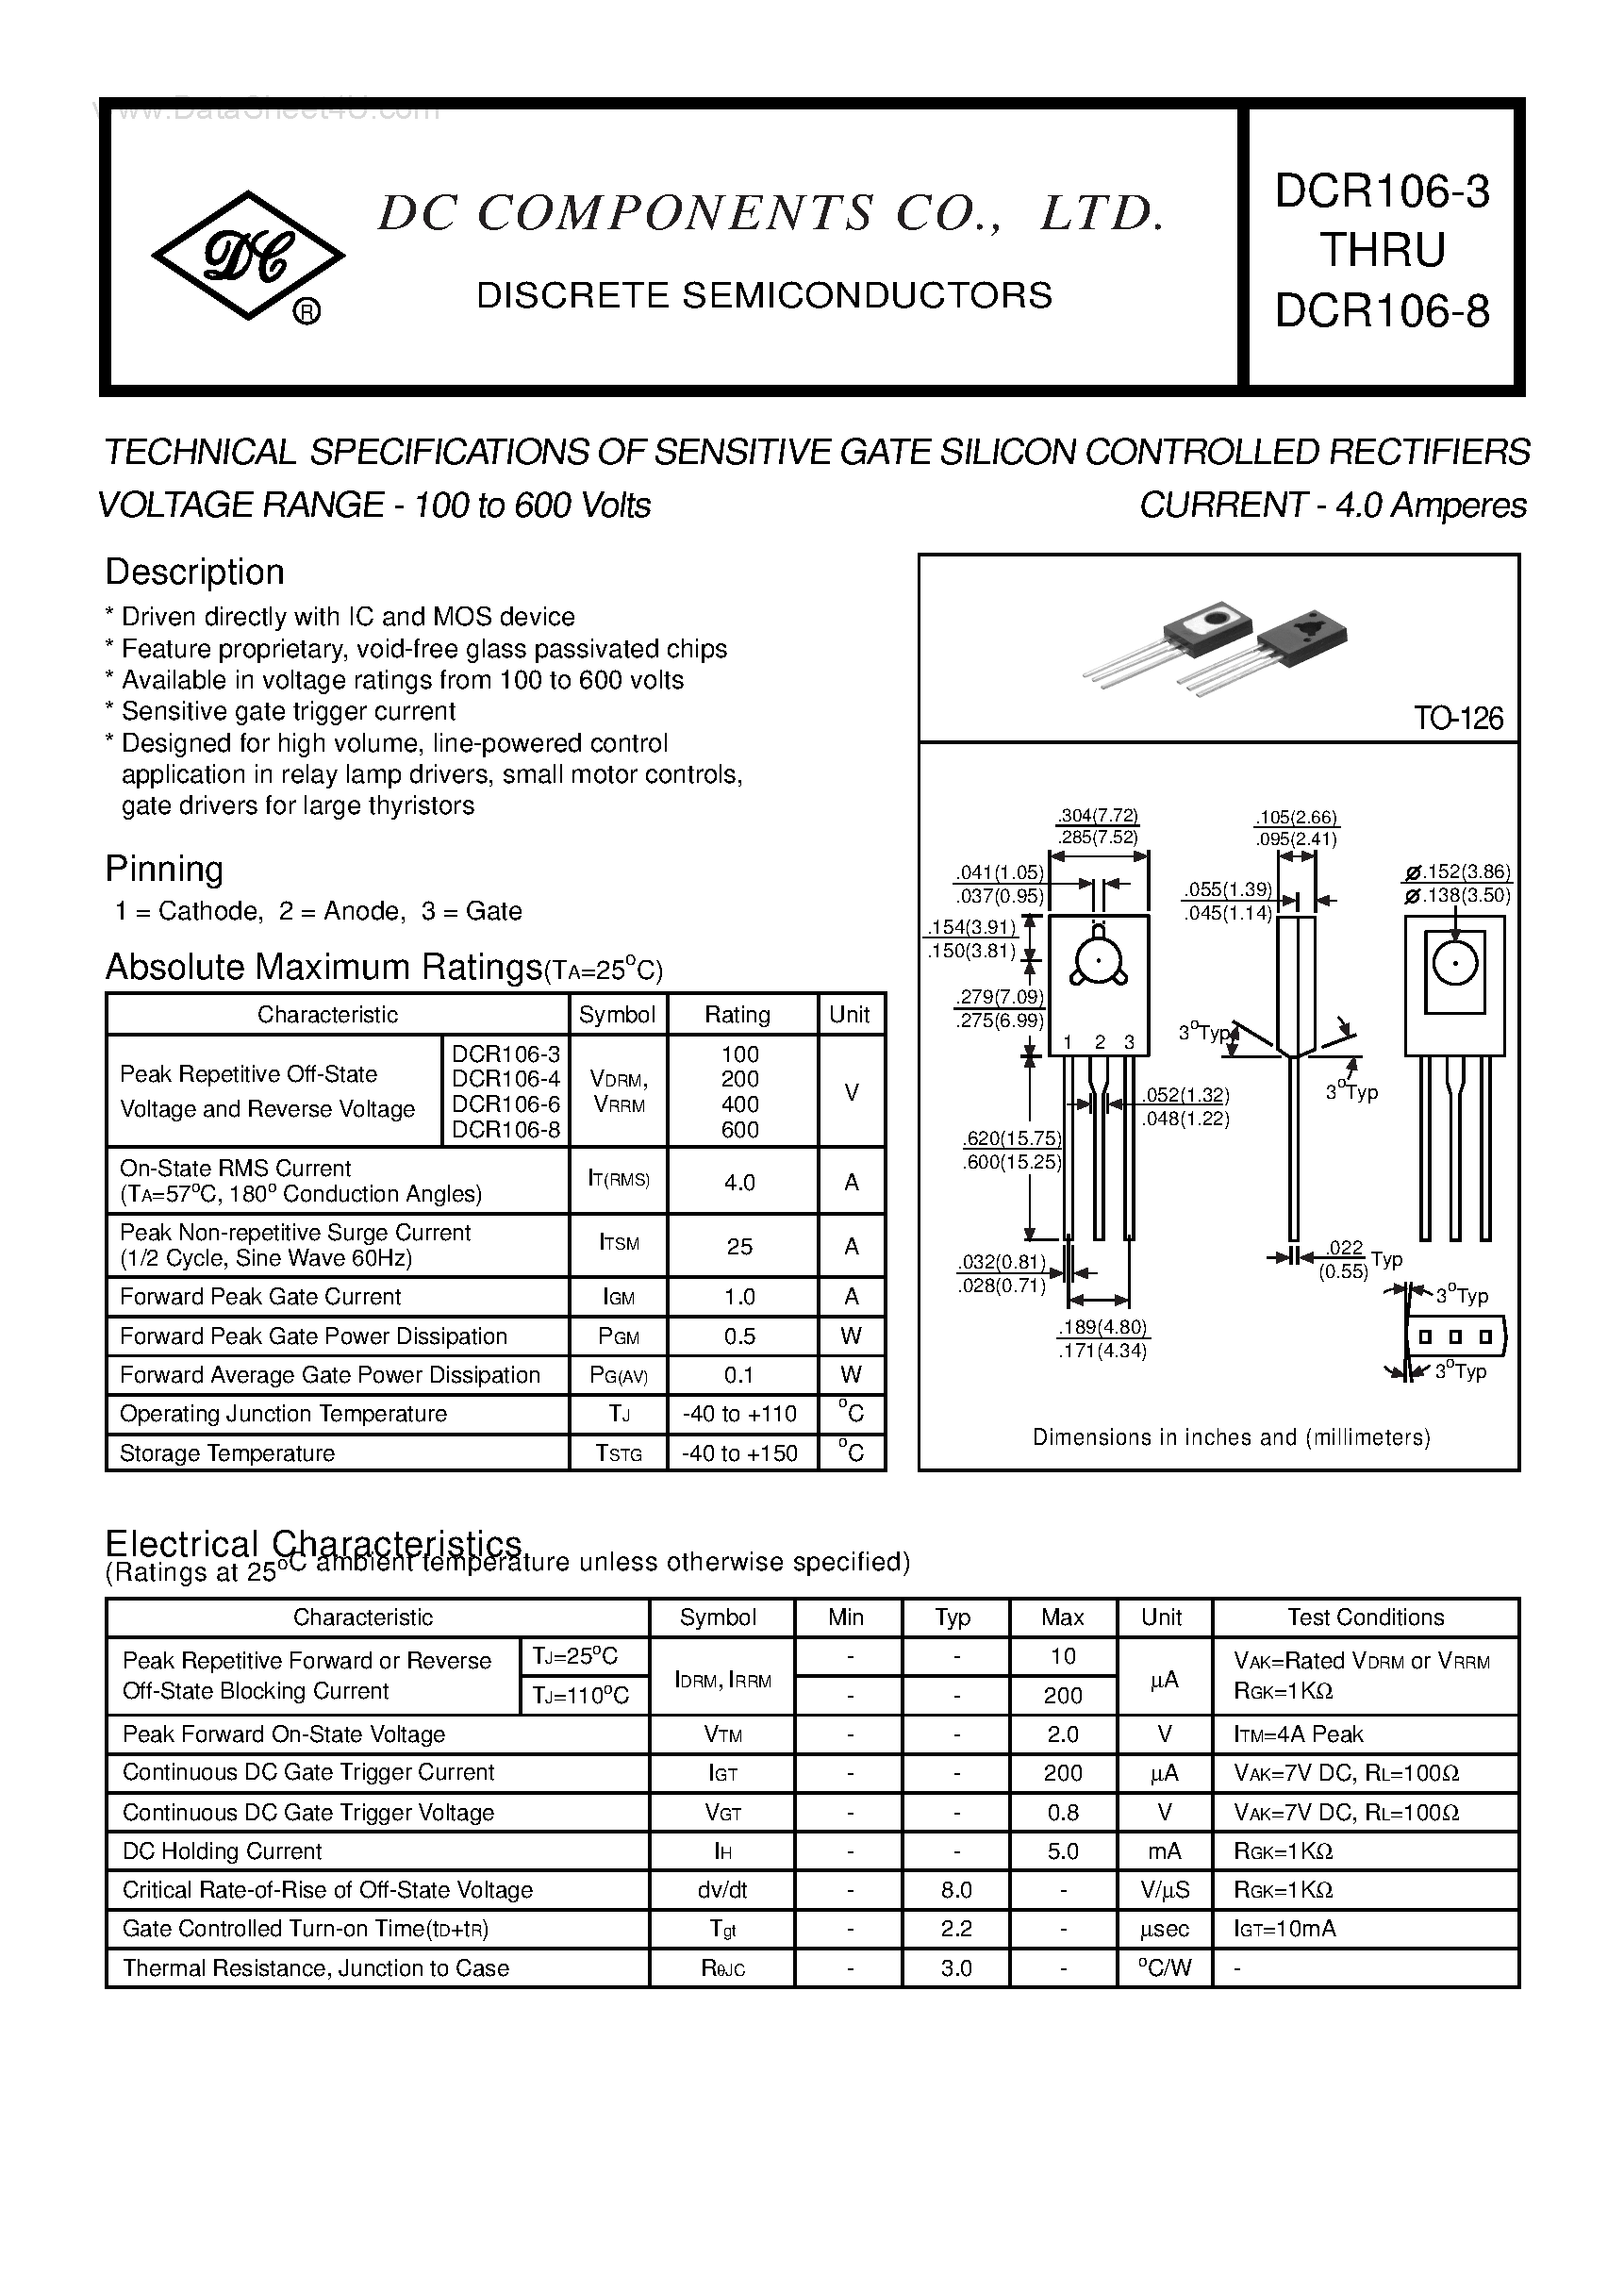 Datasheet DCR106-3 - (DCR106-3 - DCR106-8) TECHNICAL SPECIFICATIONS OF SENSITIVE GATE SILICON CONTROLLED RECTIFIERS page 1